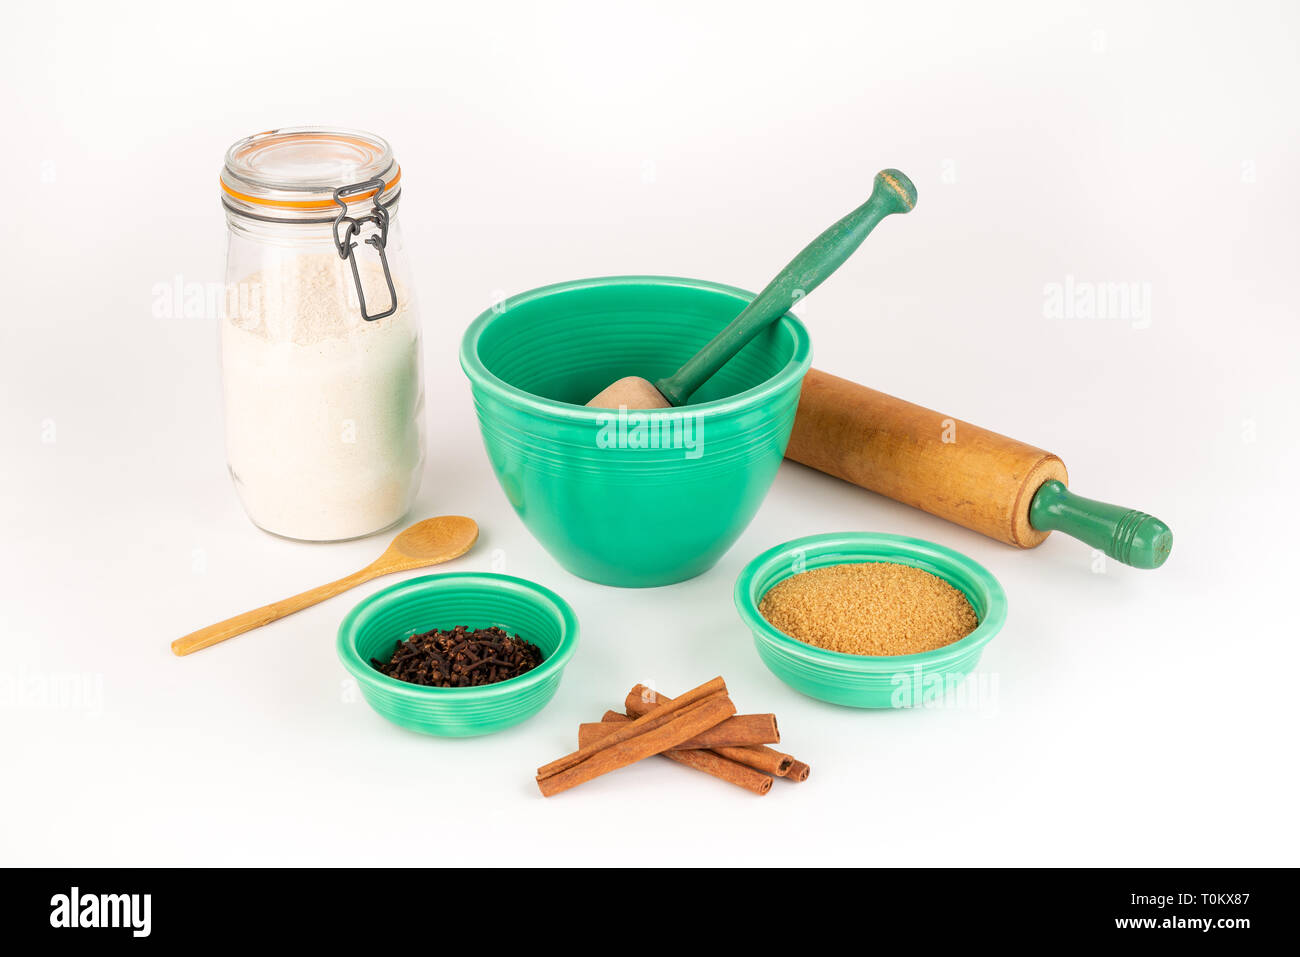 Baking Ingredients with Vintage Fiesta Ware Bowls and Antique Rolling Pin. Cinnamon, Organic Sugar, Wheat Flour in Glass Jar. Wooden Spoon. Stock Photo